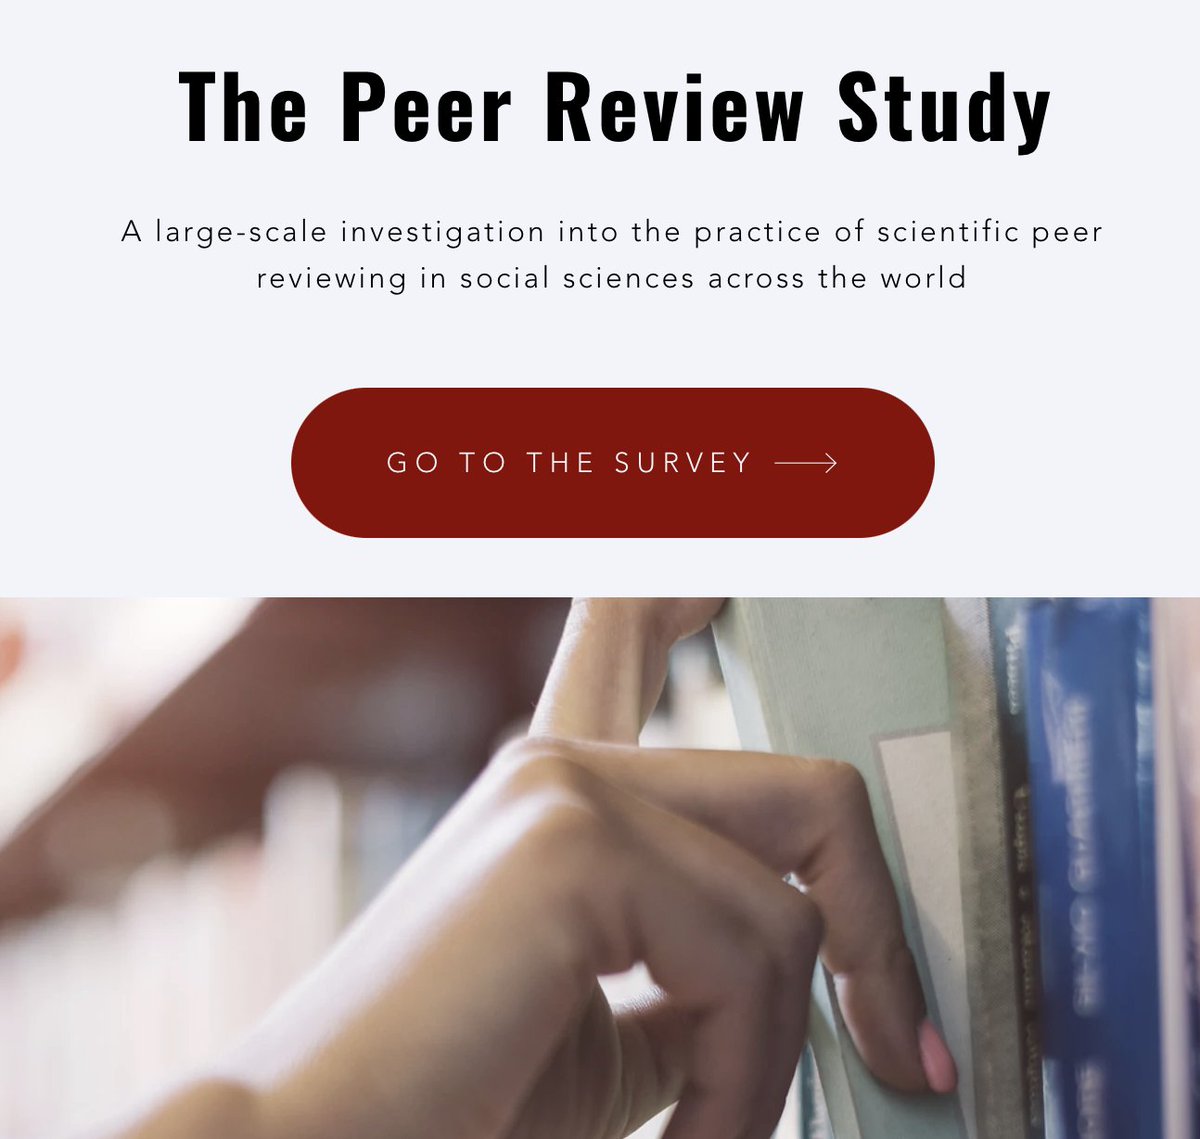 🚨 PEER REVIEW SURVEY ALERT 🚨 We investigate perceptions & practices of peer review in social sciences worldwide The survey is now ** open to all participants ** 🌎🌍🌏 Thoughts about peer review? Take the survey ➡️peerreviewstudy.com Plz retweet for N and diversity 🔥